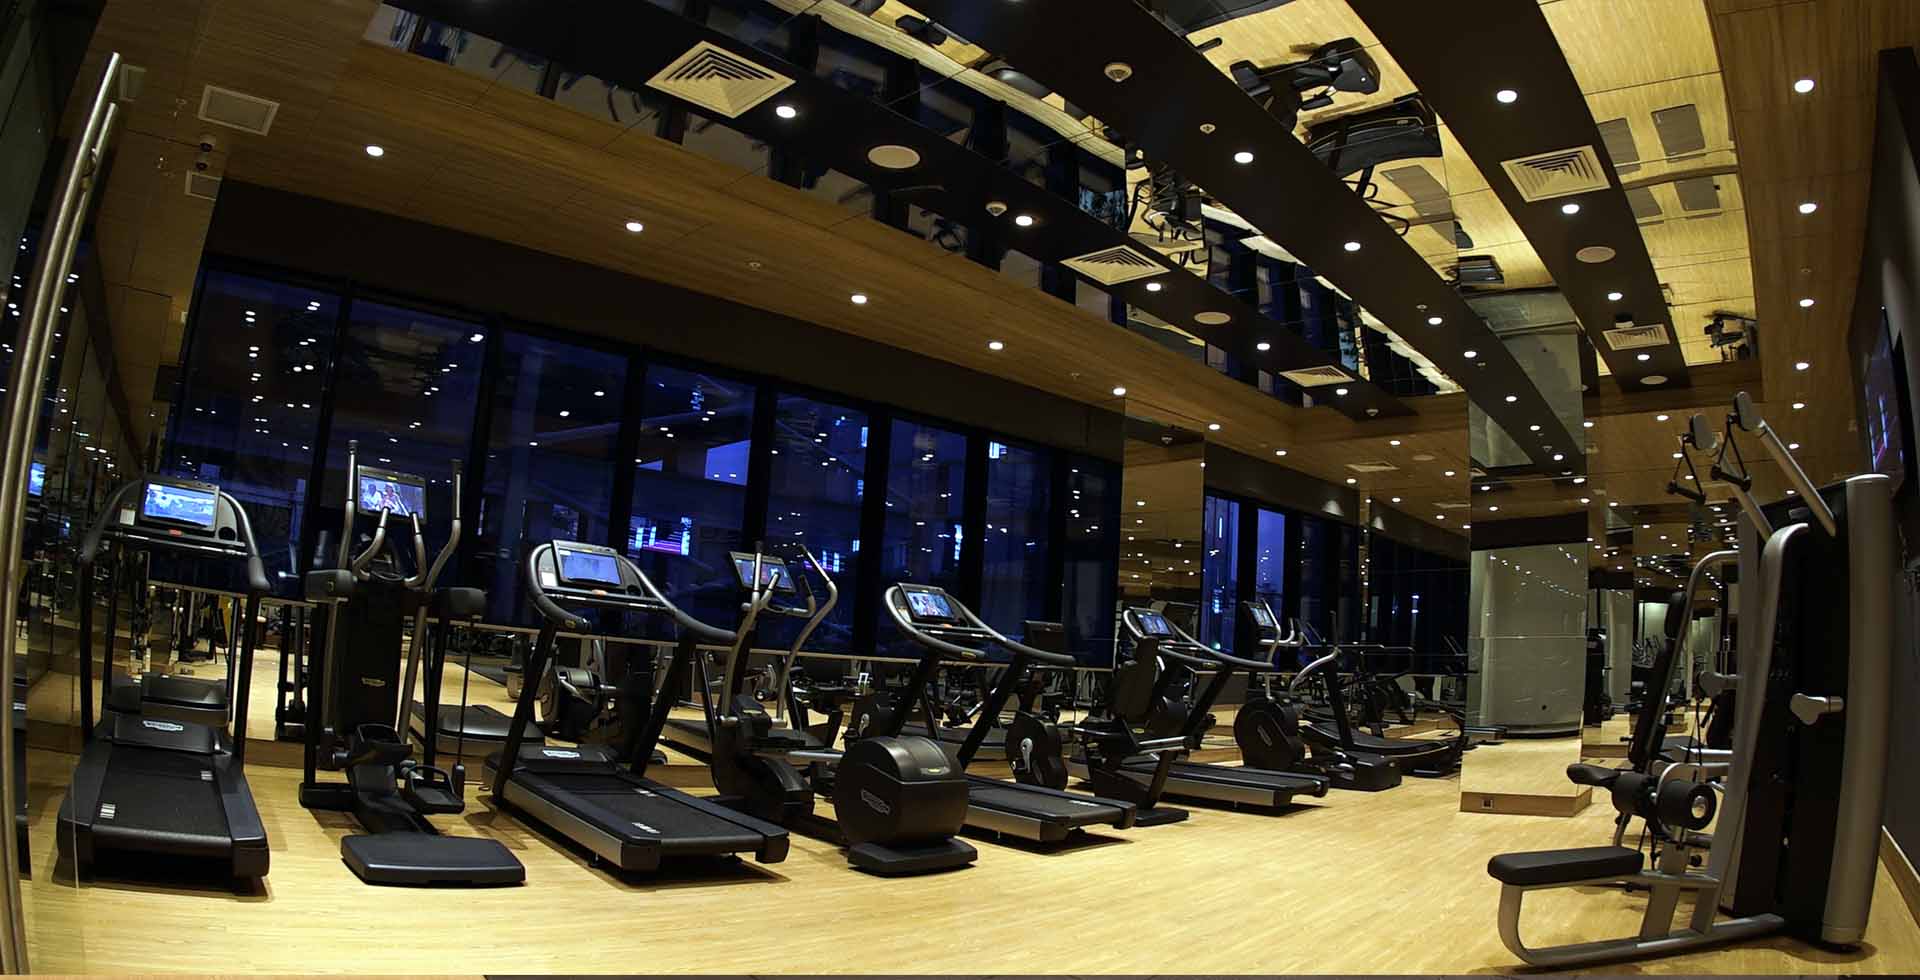 Sauna Dekor's contemporary fitness sport center in Eindhoven, equipped with modern exercise facilities, combines fitness excellence with sleek design for an elevated workout environment.